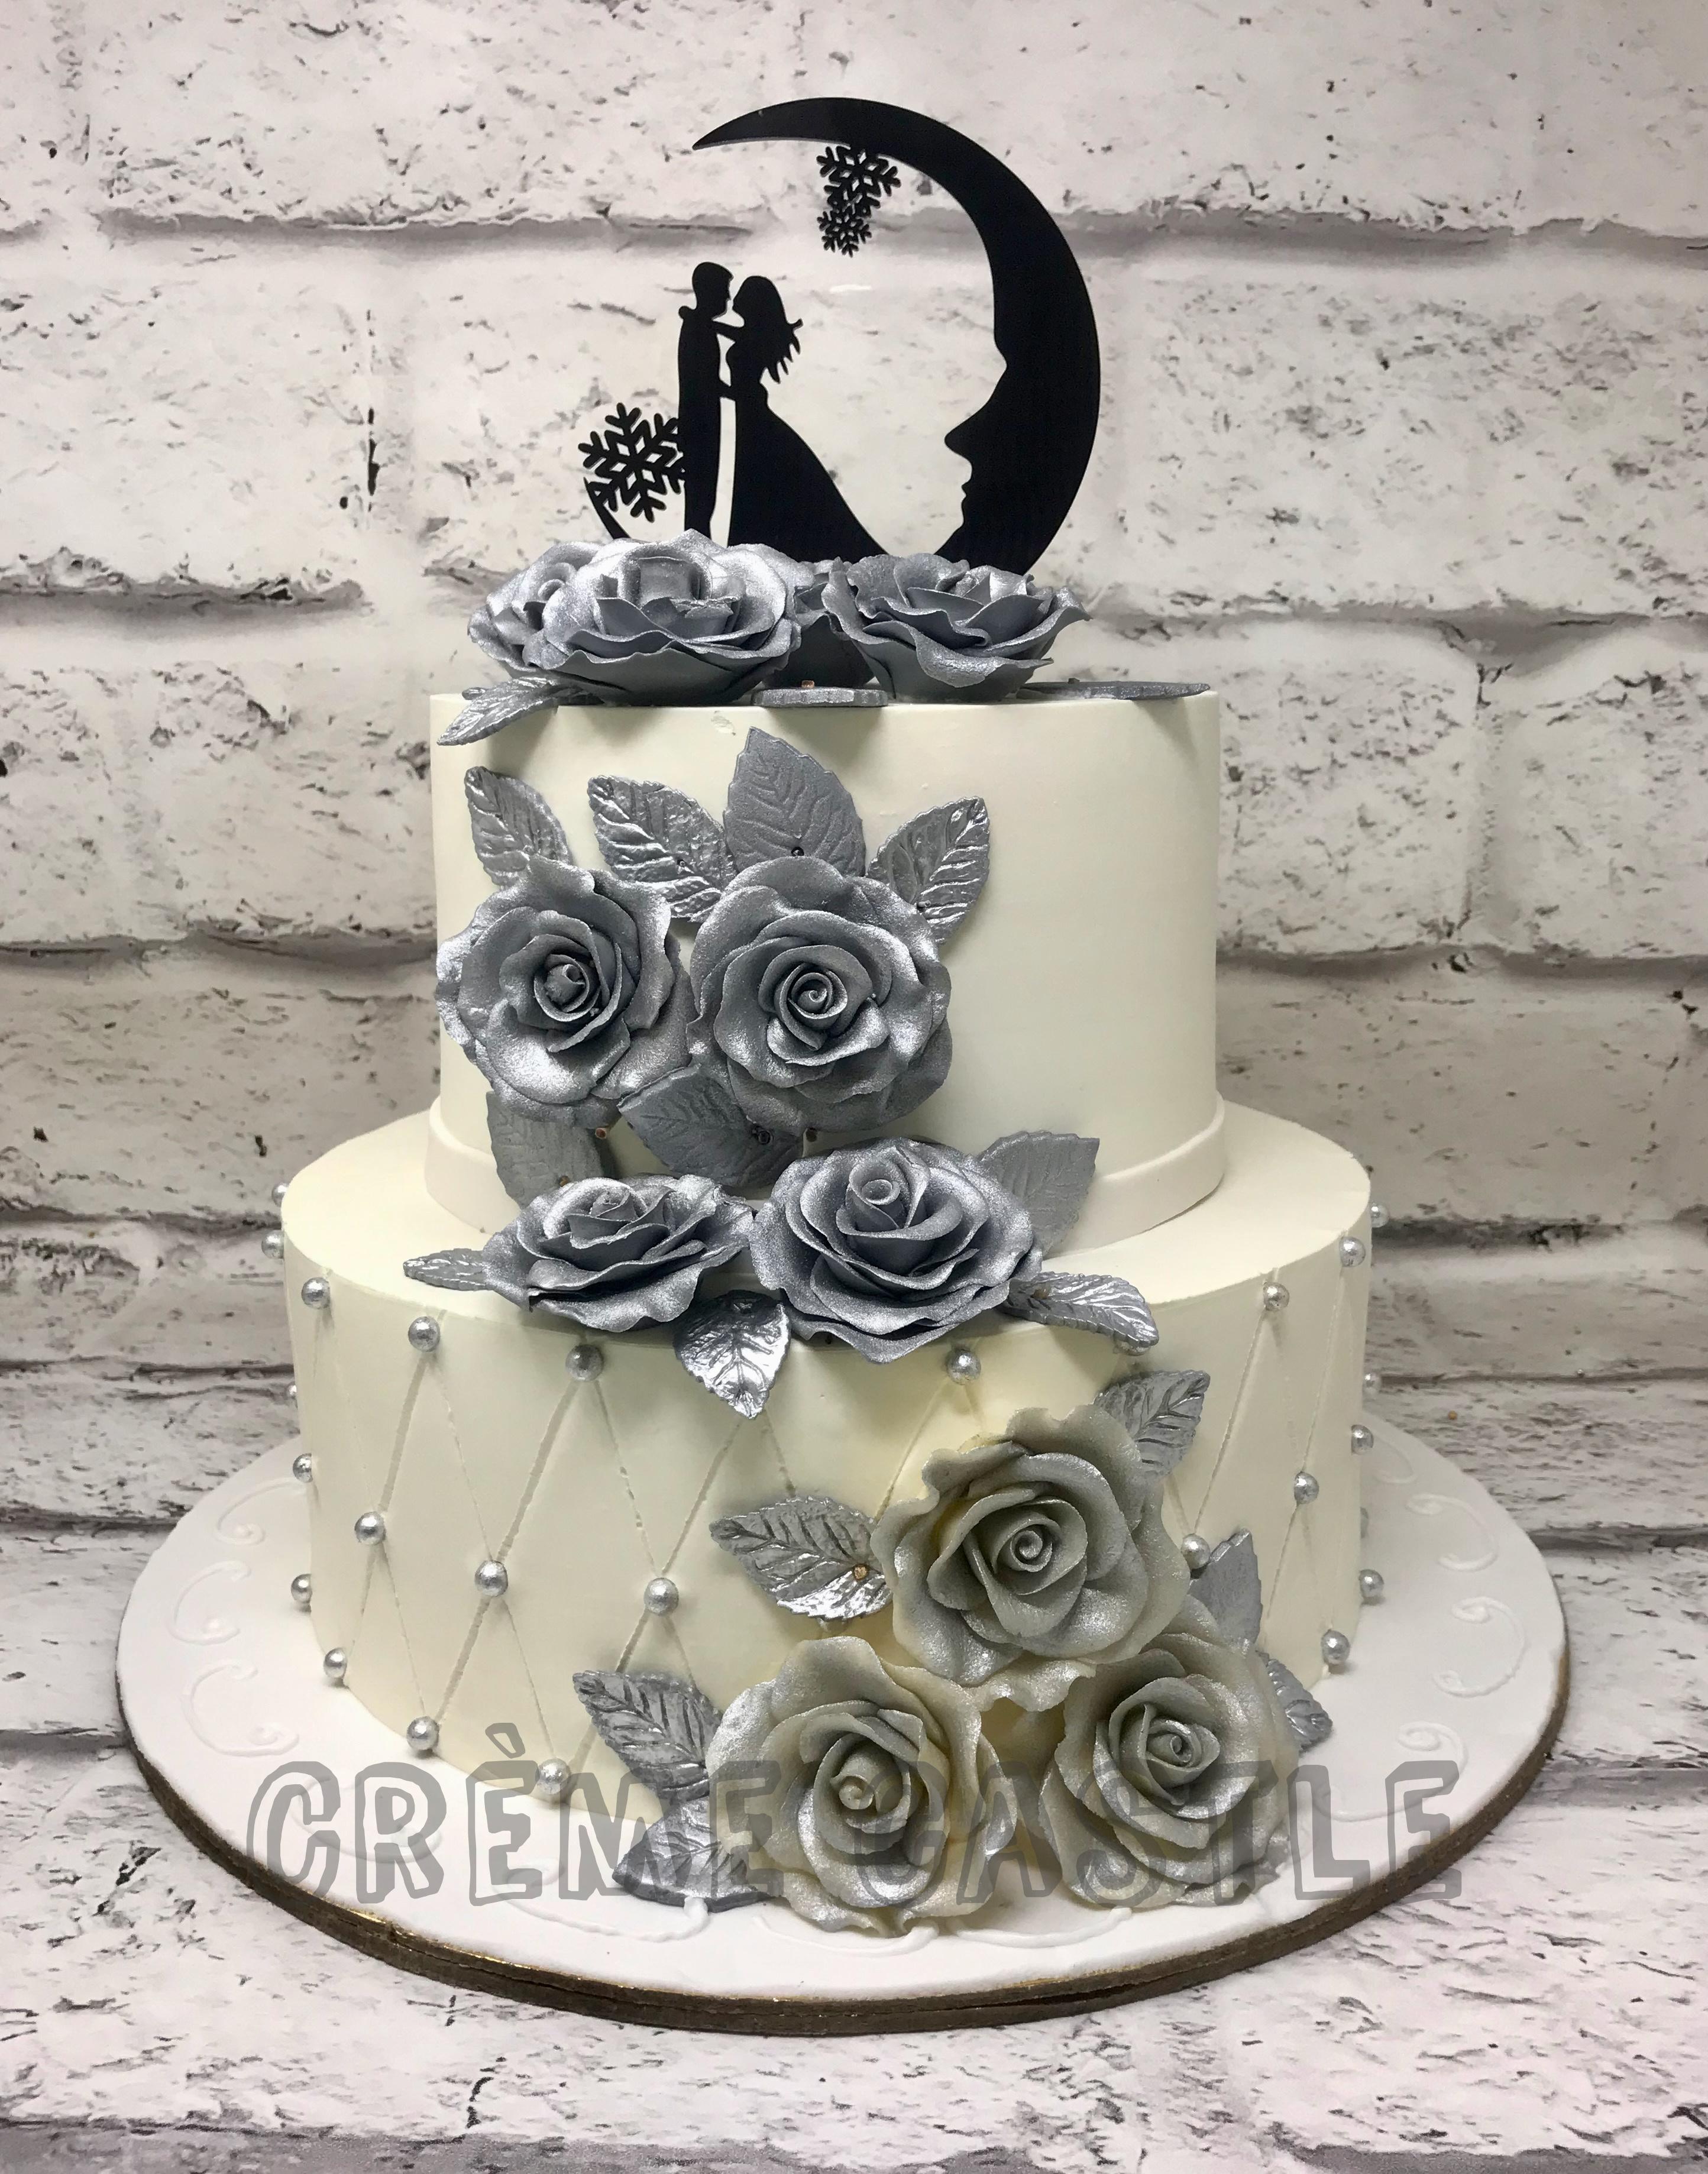 Delicious - Silver jubilee cake done right!💯 . . Size - 1... | Facebook